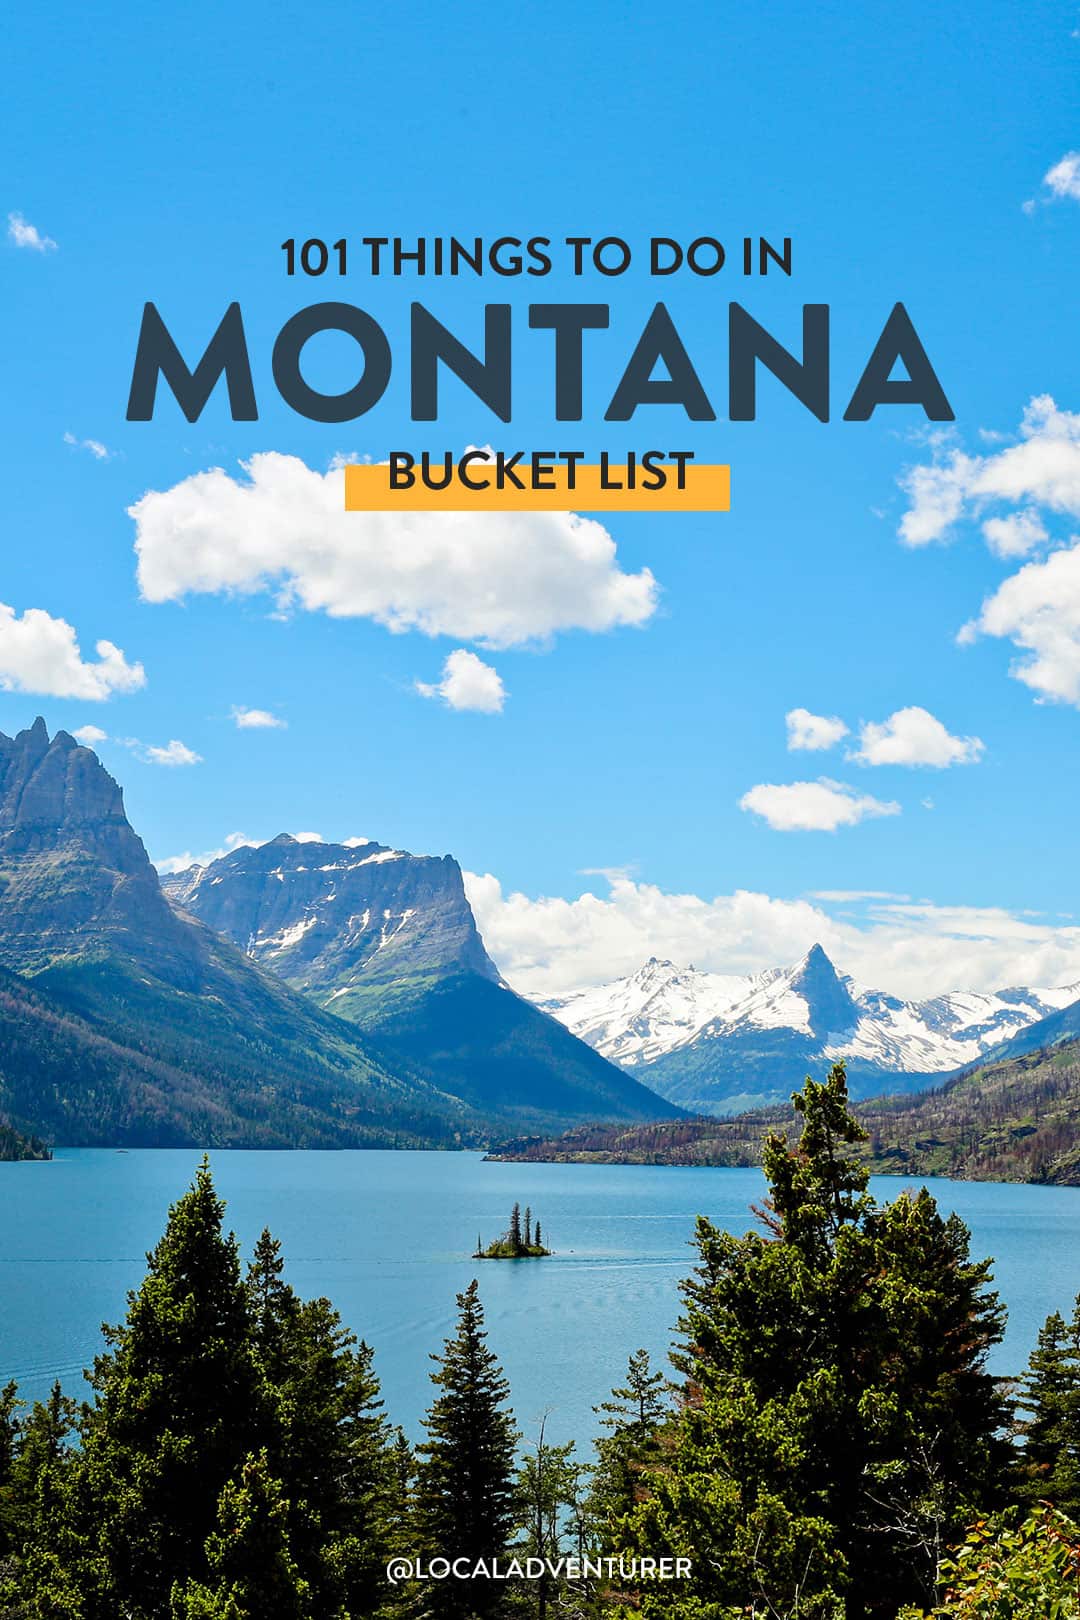 101 Things to Do in Montana Bucket List